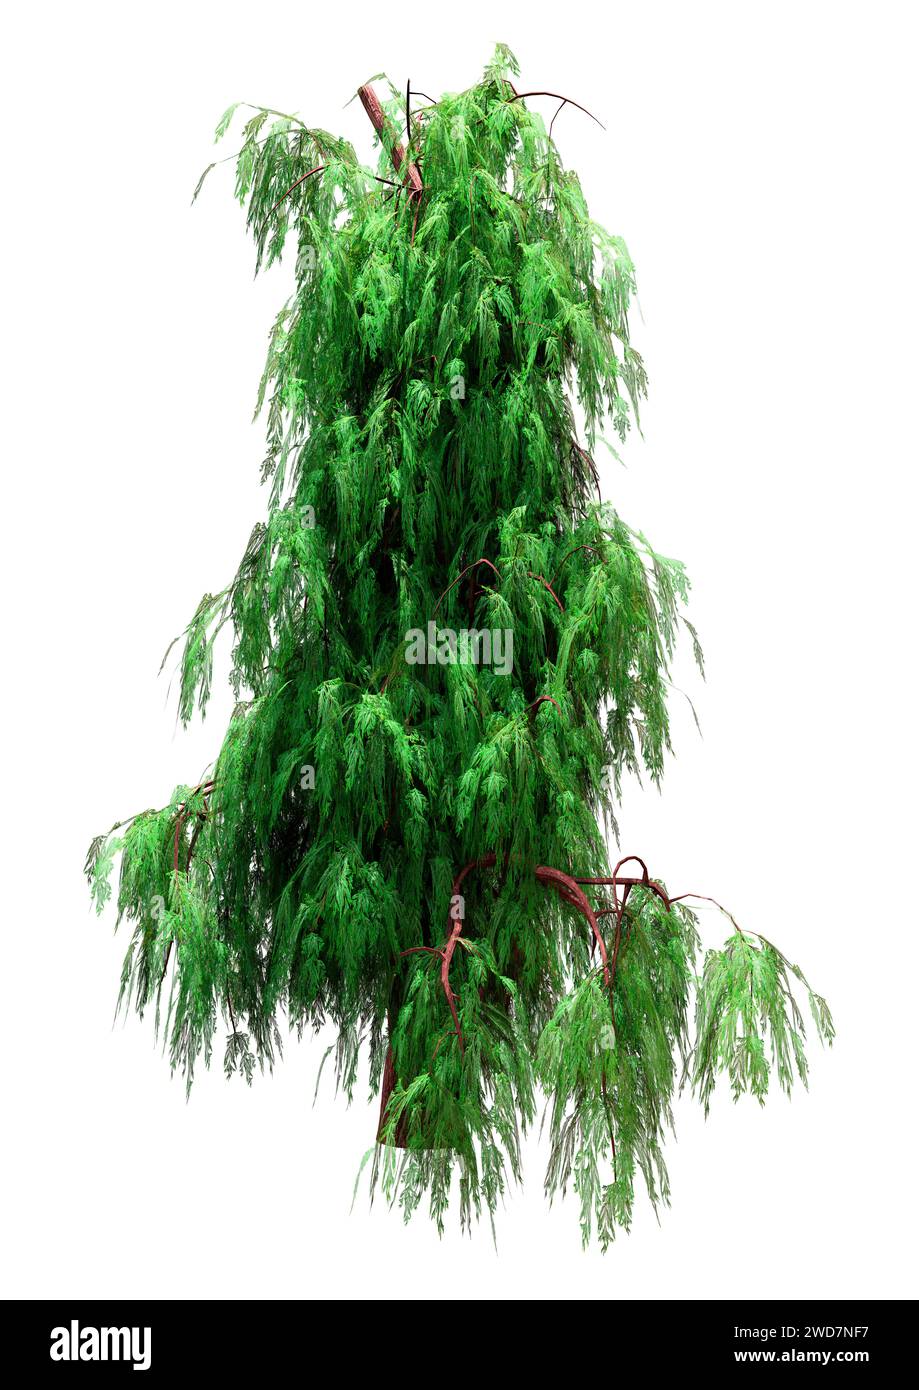 3D rendering of a Kashmir cypress tree isolated on white background Stock Photo